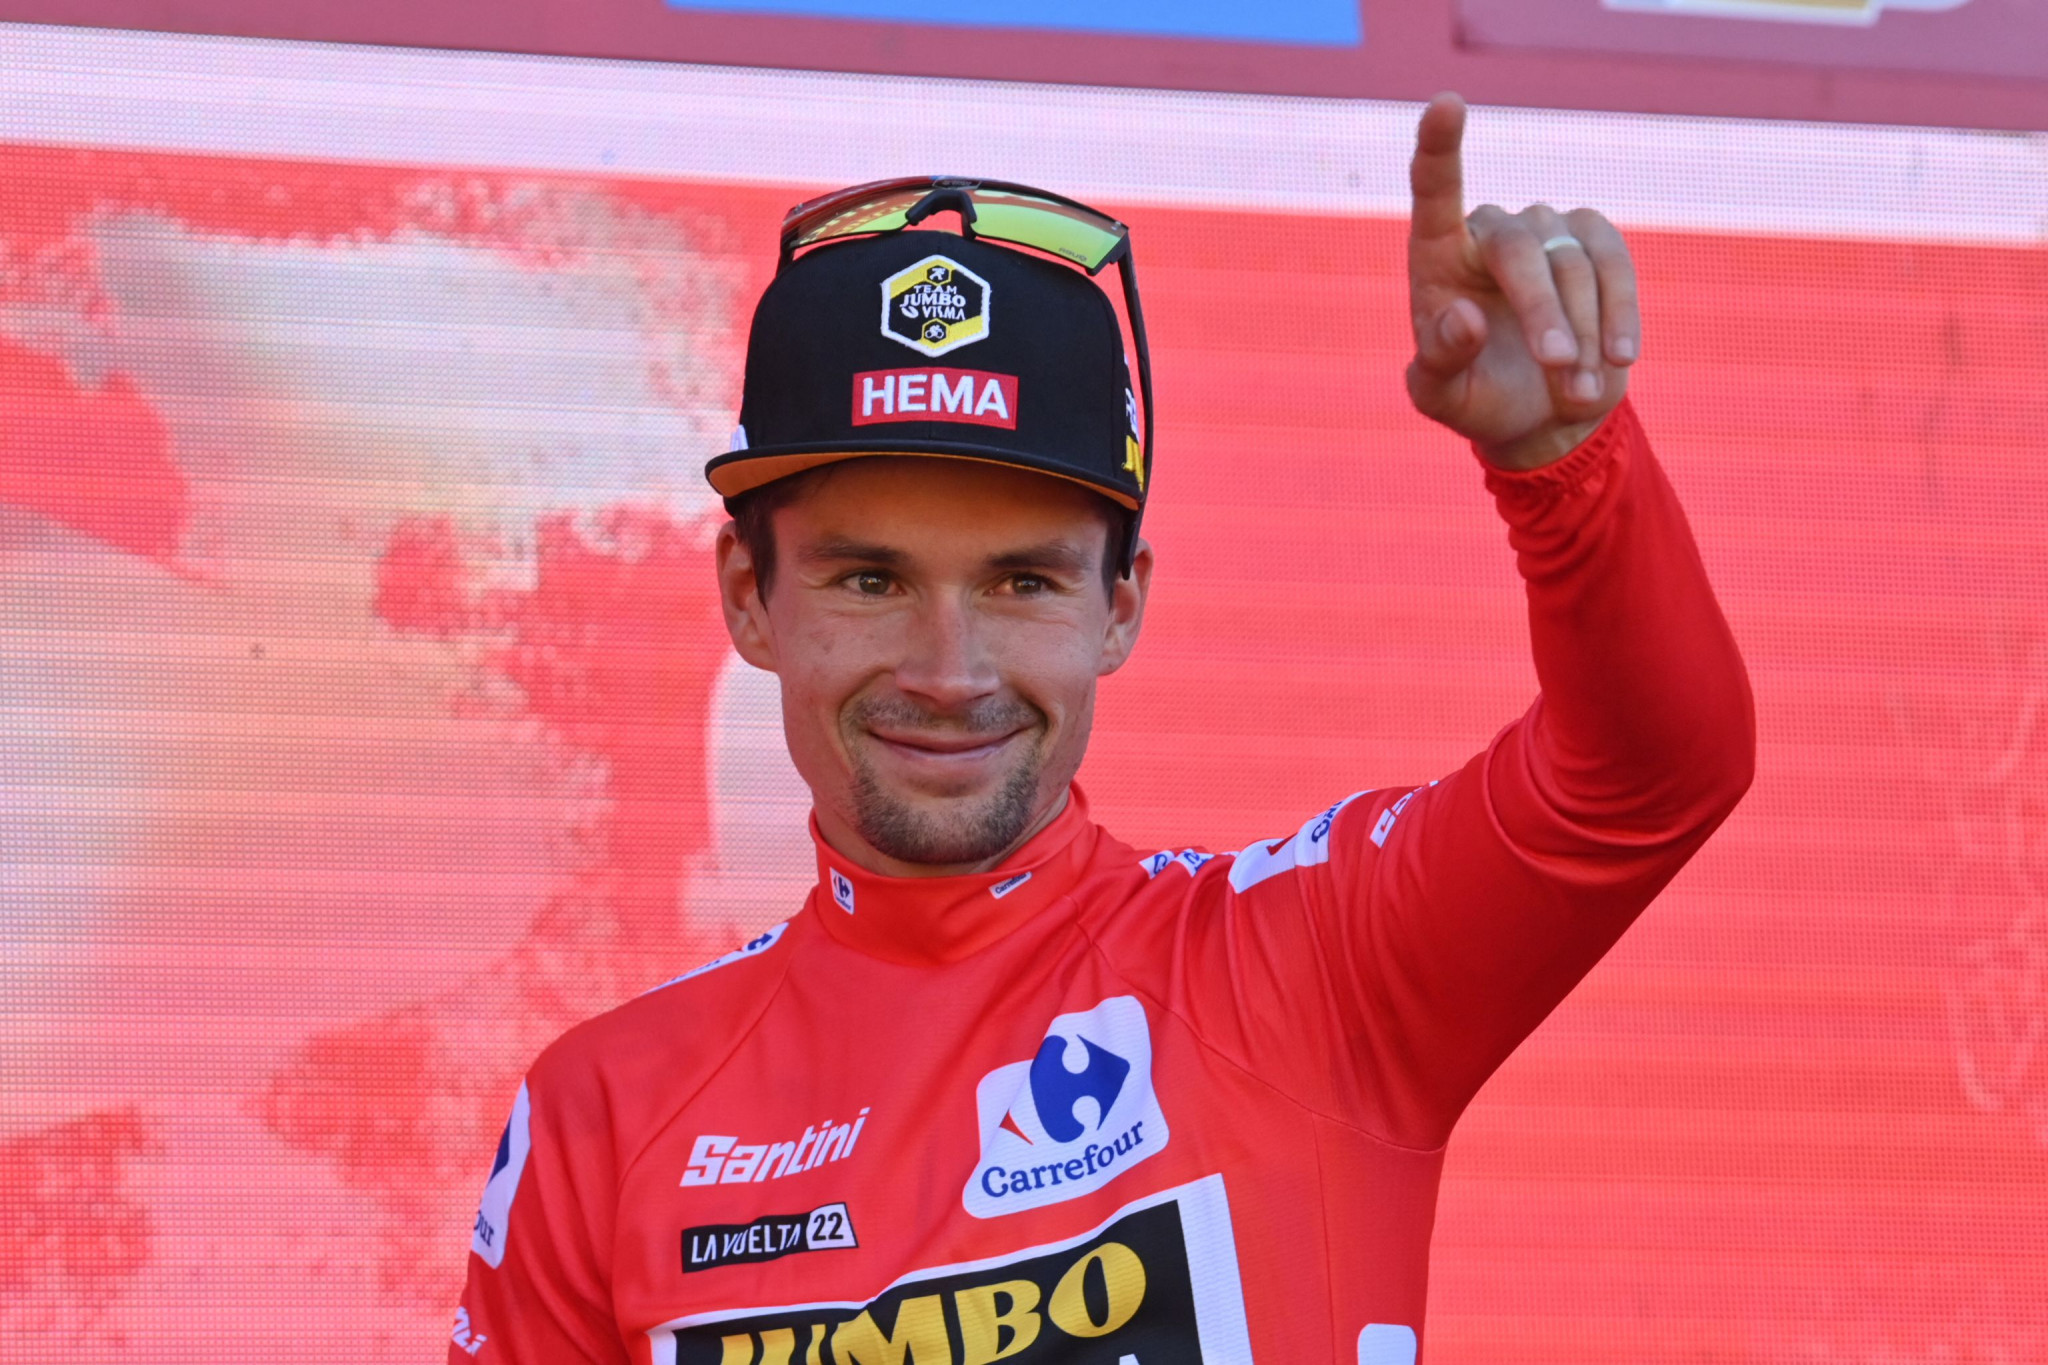 Primož Roglič now has the overall lead of the Vuelta a España ©Getty Images